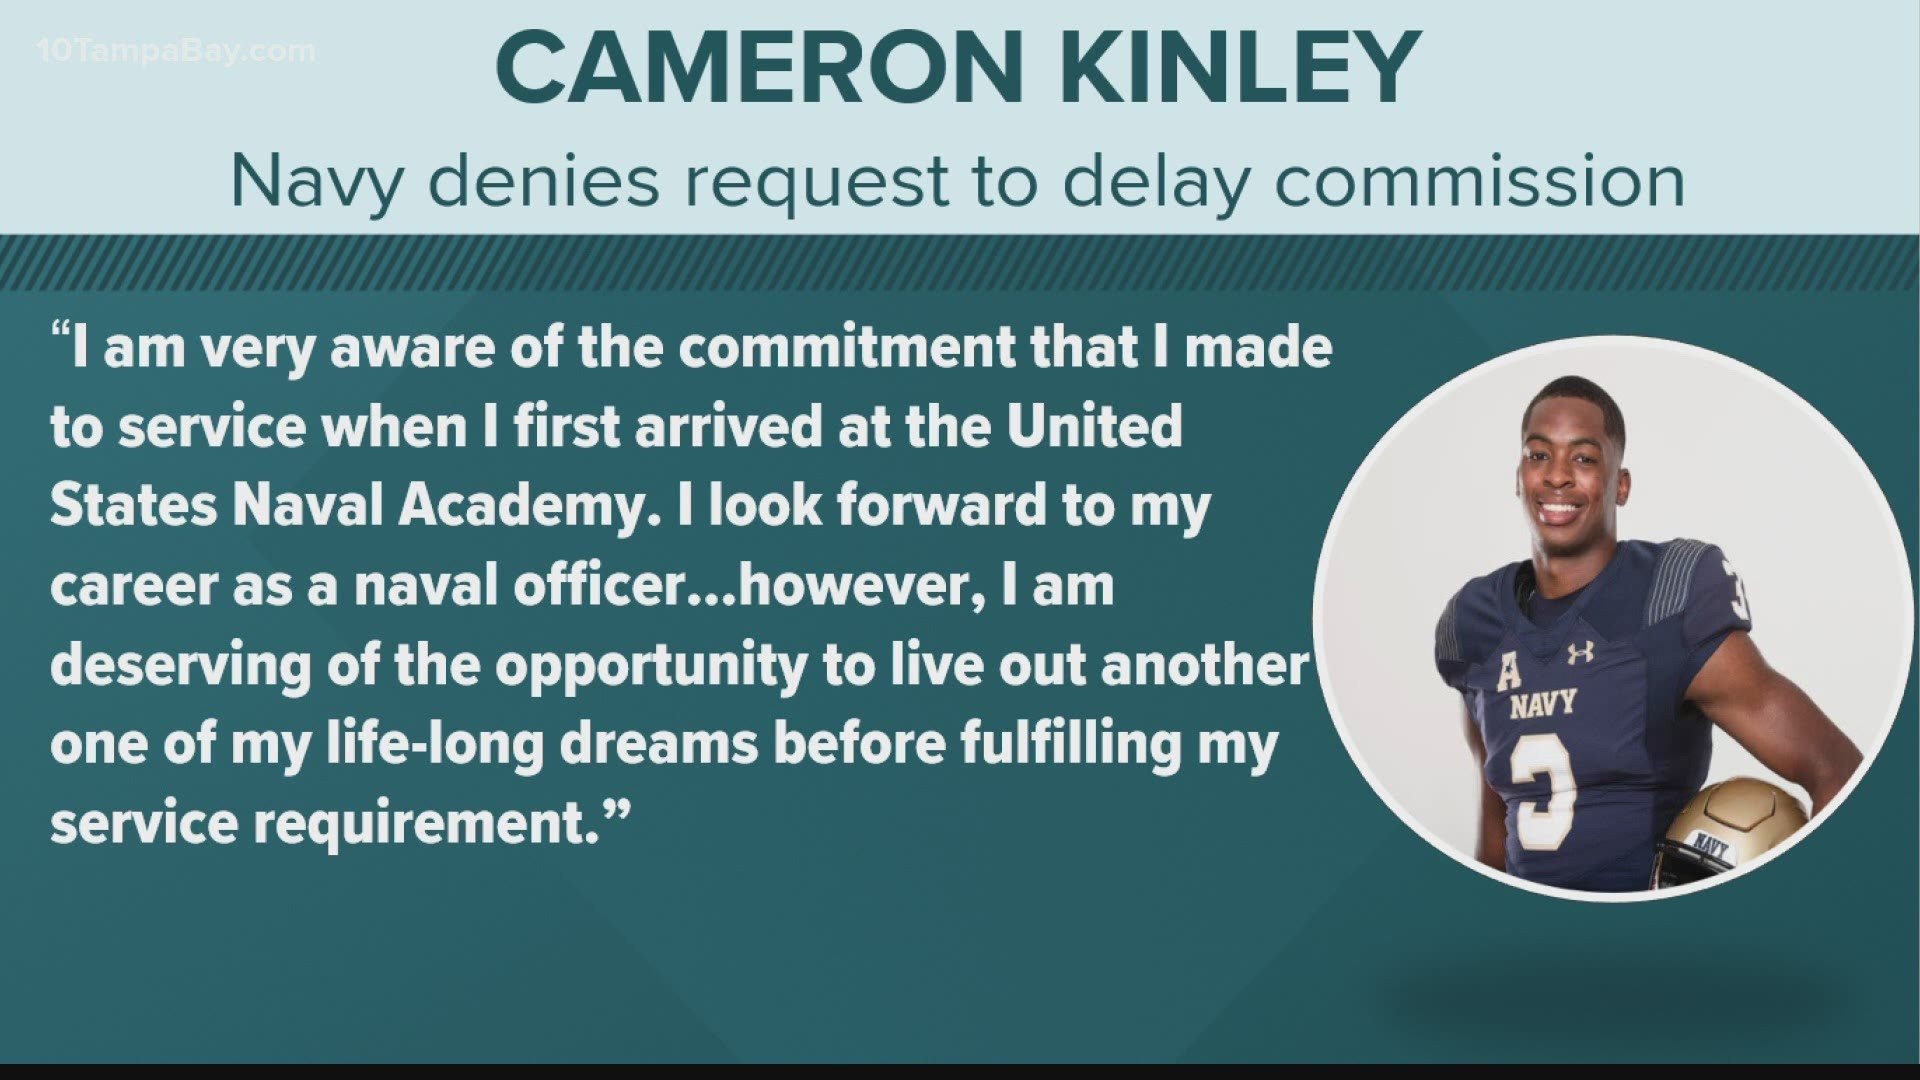 “I do not know why my request was denied, as I have received no written explanation for this decision," Kinley wrote.